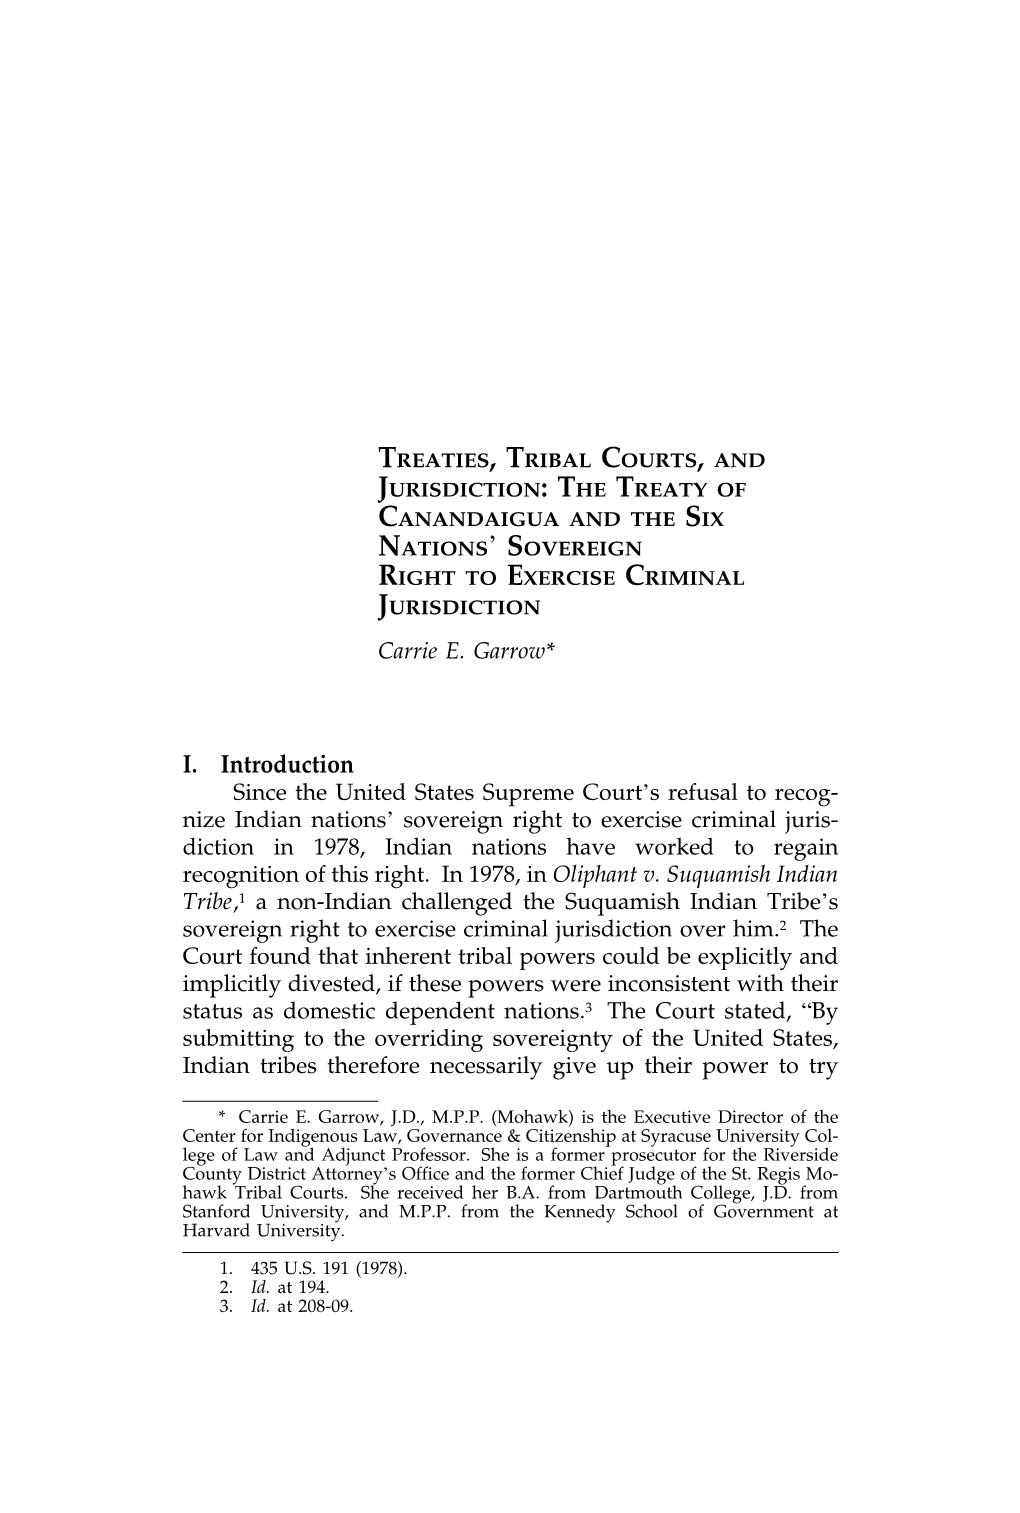 TREATIES, TRIBAL COURTS, and JURISDICTION: the TREATY of CANANDAIGUA and the SIX NATIONS’ SOVEREIGN RIGHT to EXERCISE CRIMINAL JURISDICTION Carrie E